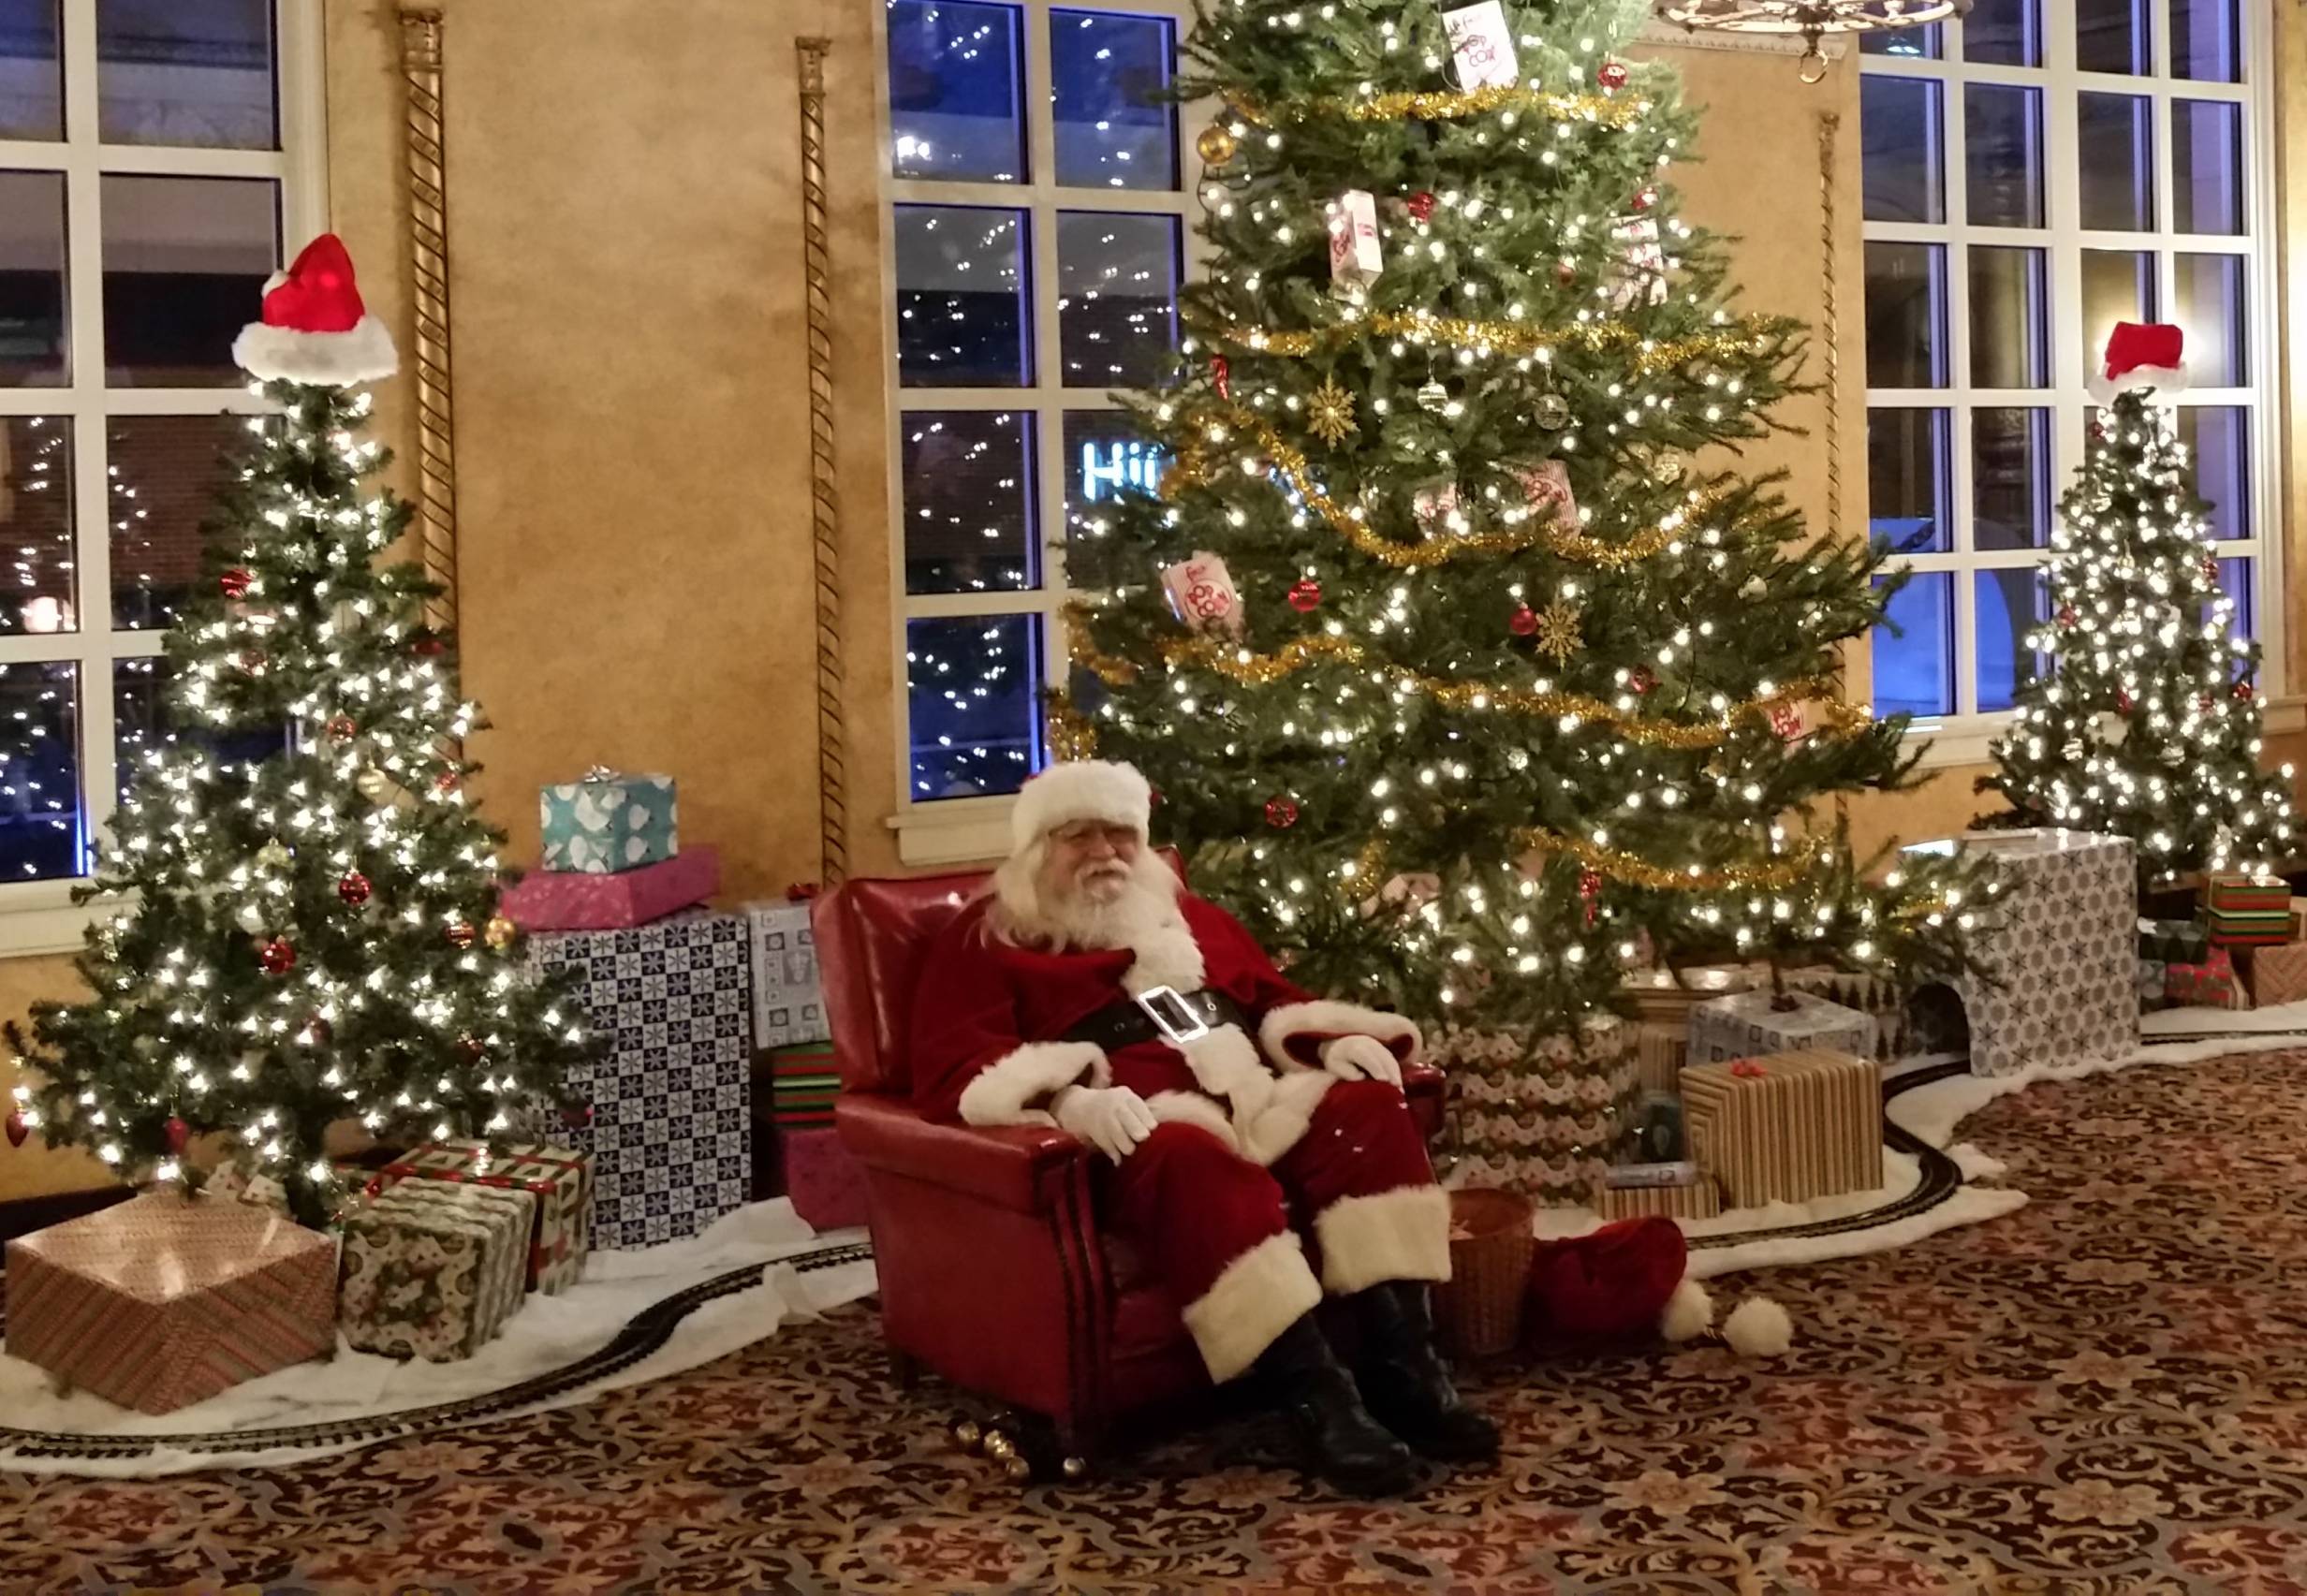 You can take pictures with Santa at the Virginia Theatre this week and next